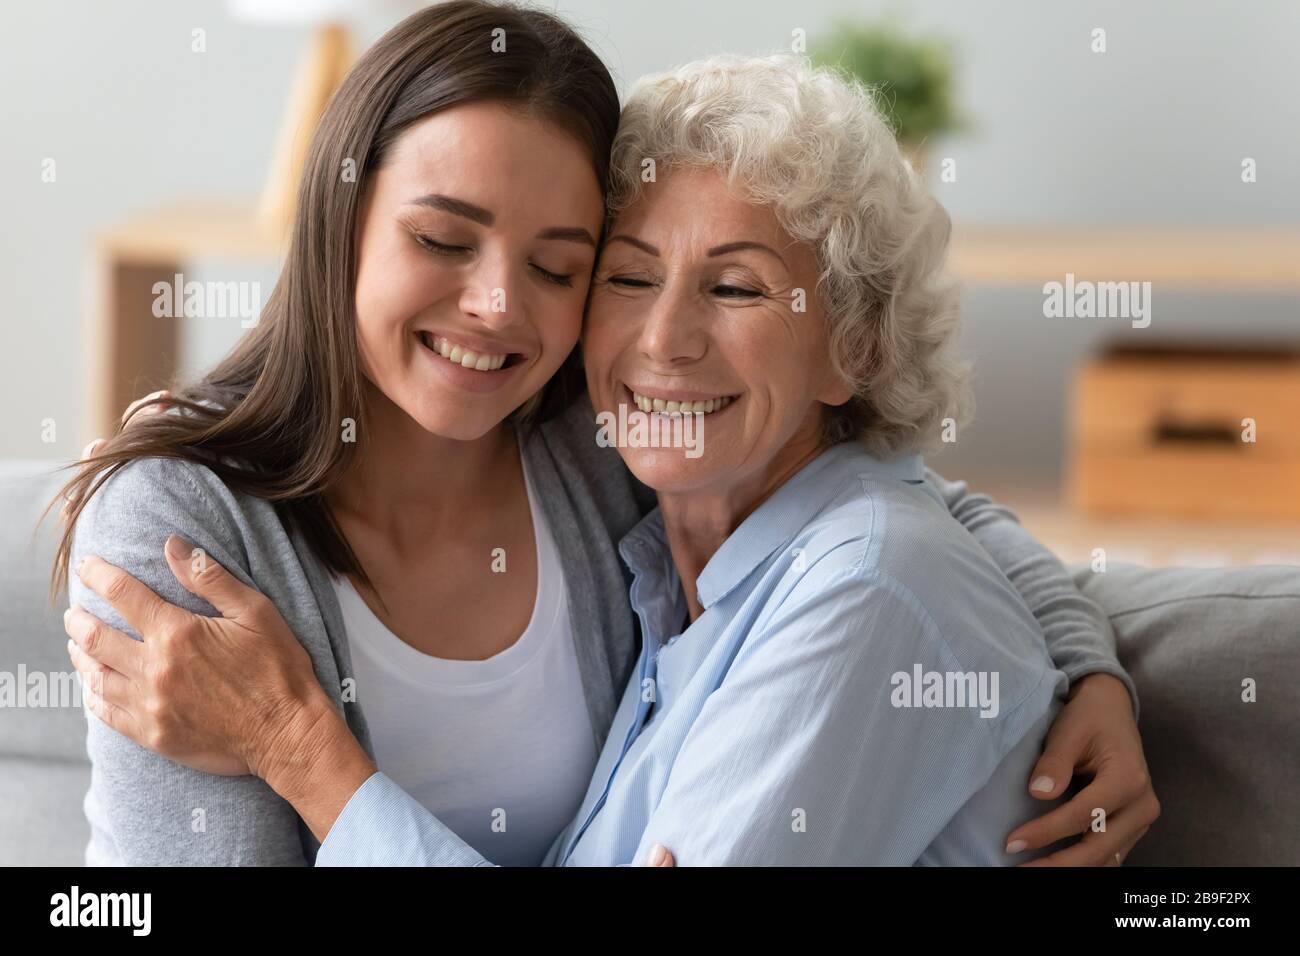 Smiling elderly mom and adult daughter enjoy home moment Stock Photo